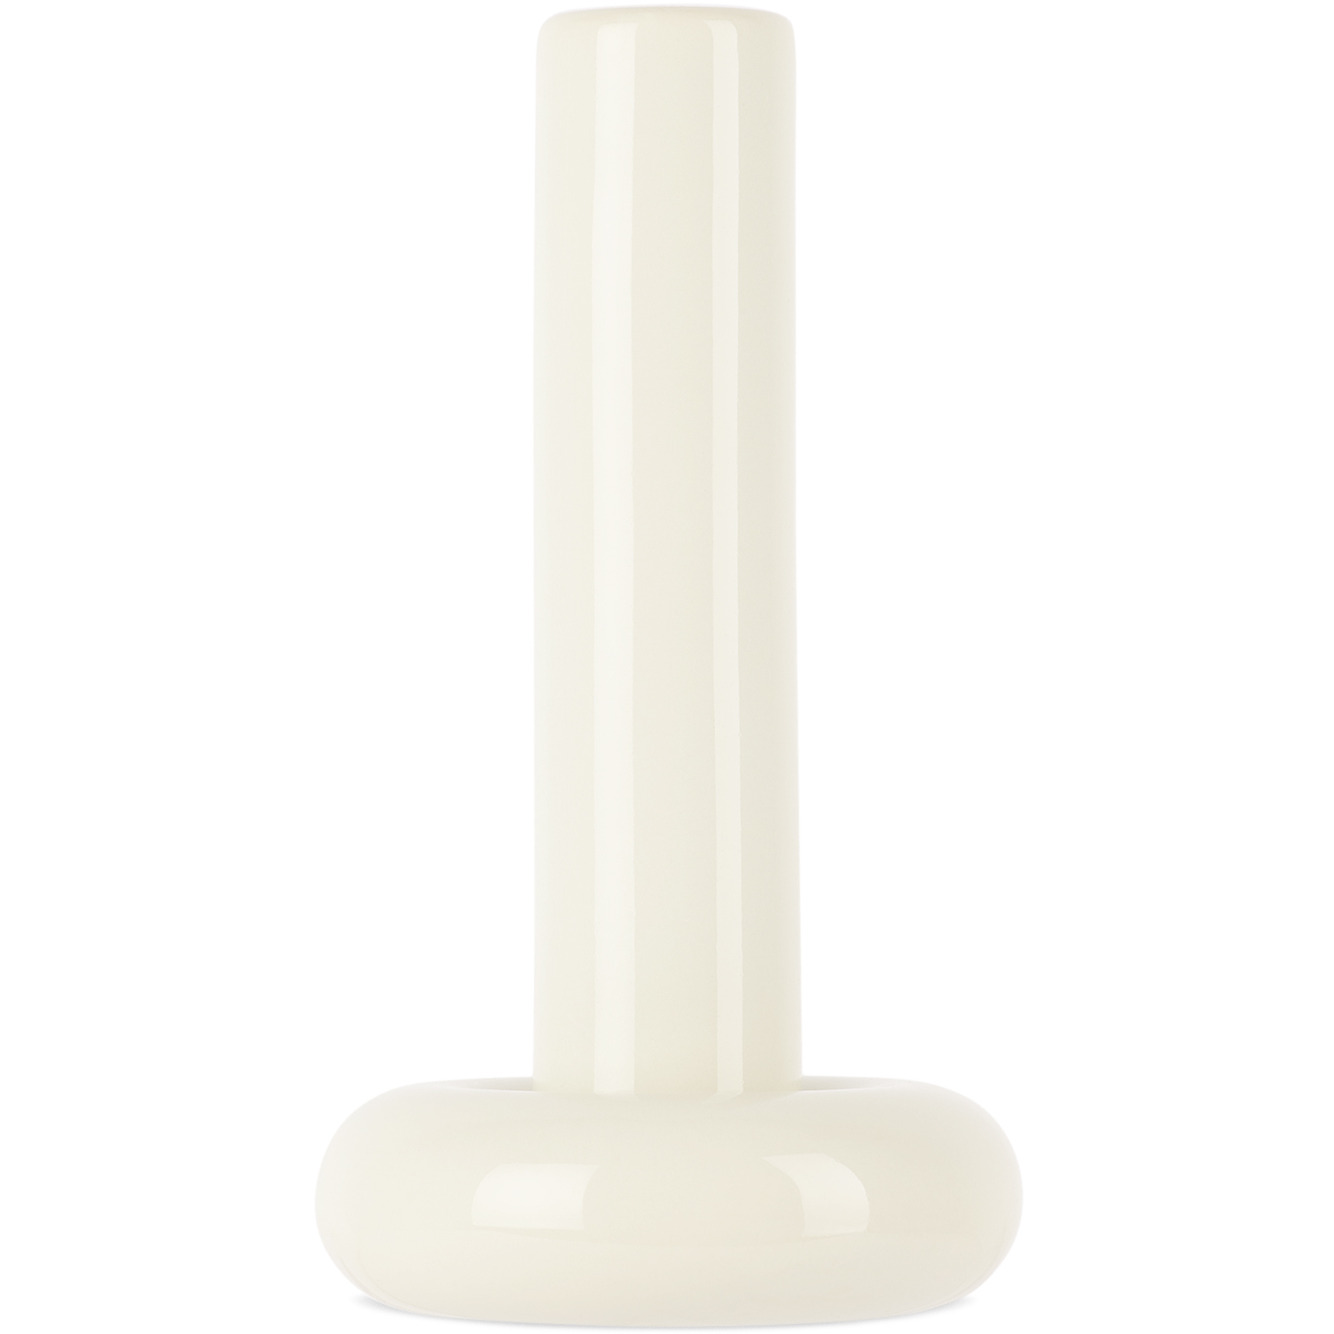 Gustaf Westman Objects White Chunky 195 Candle Holder - image 1